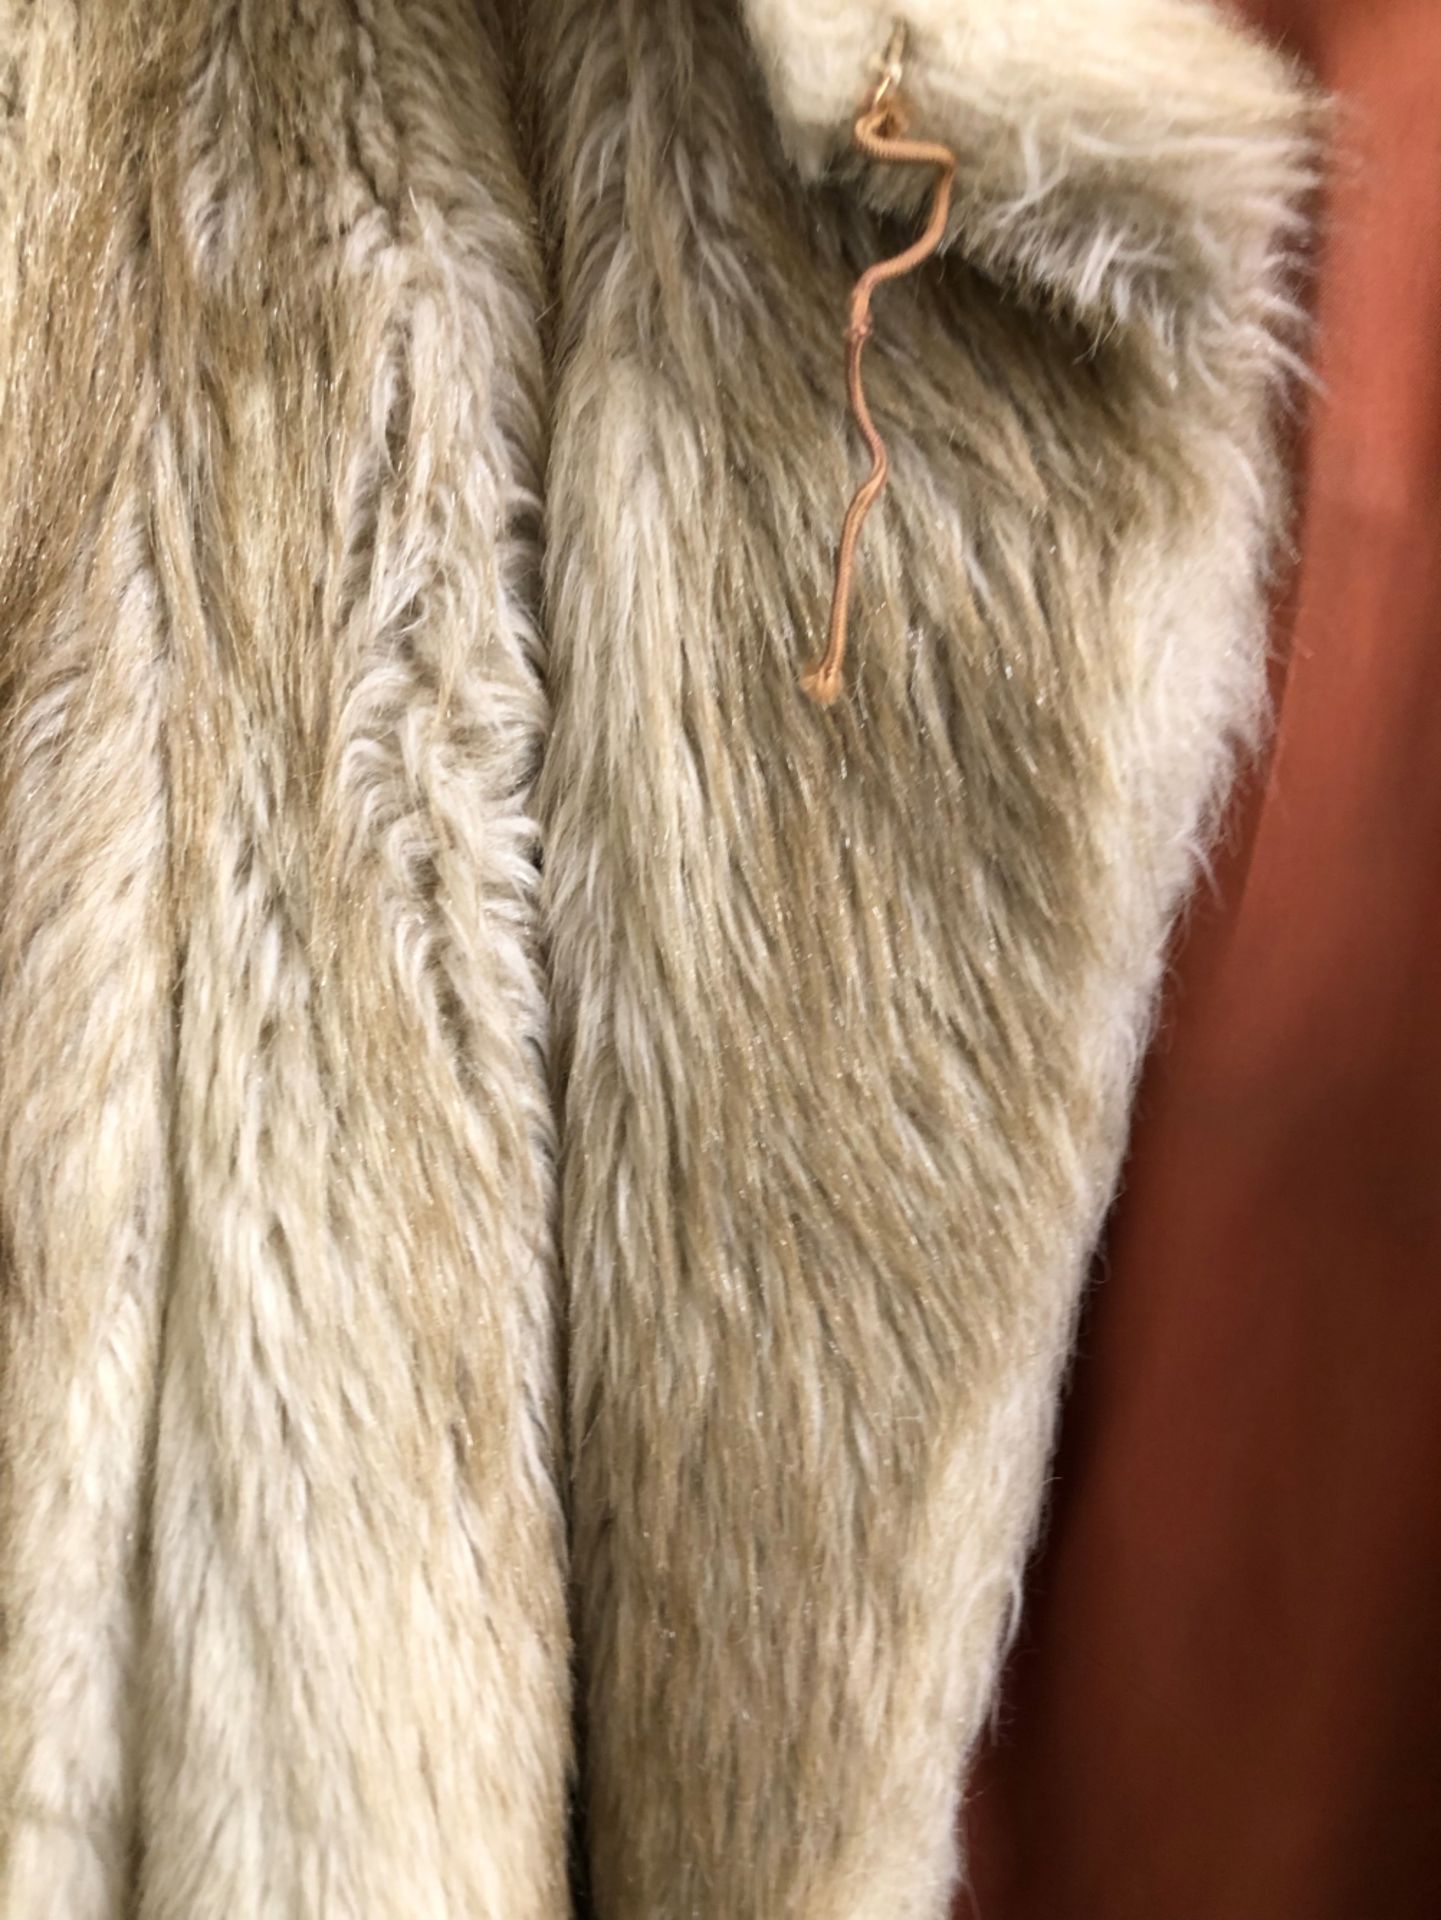 JACKET, GREY LEATHER, SIZE 14 AND A JACKET, B.Y LUXURIOUS SIMULATED FUR TERRACOTTA LINED GREY/ - Image 6 of 9